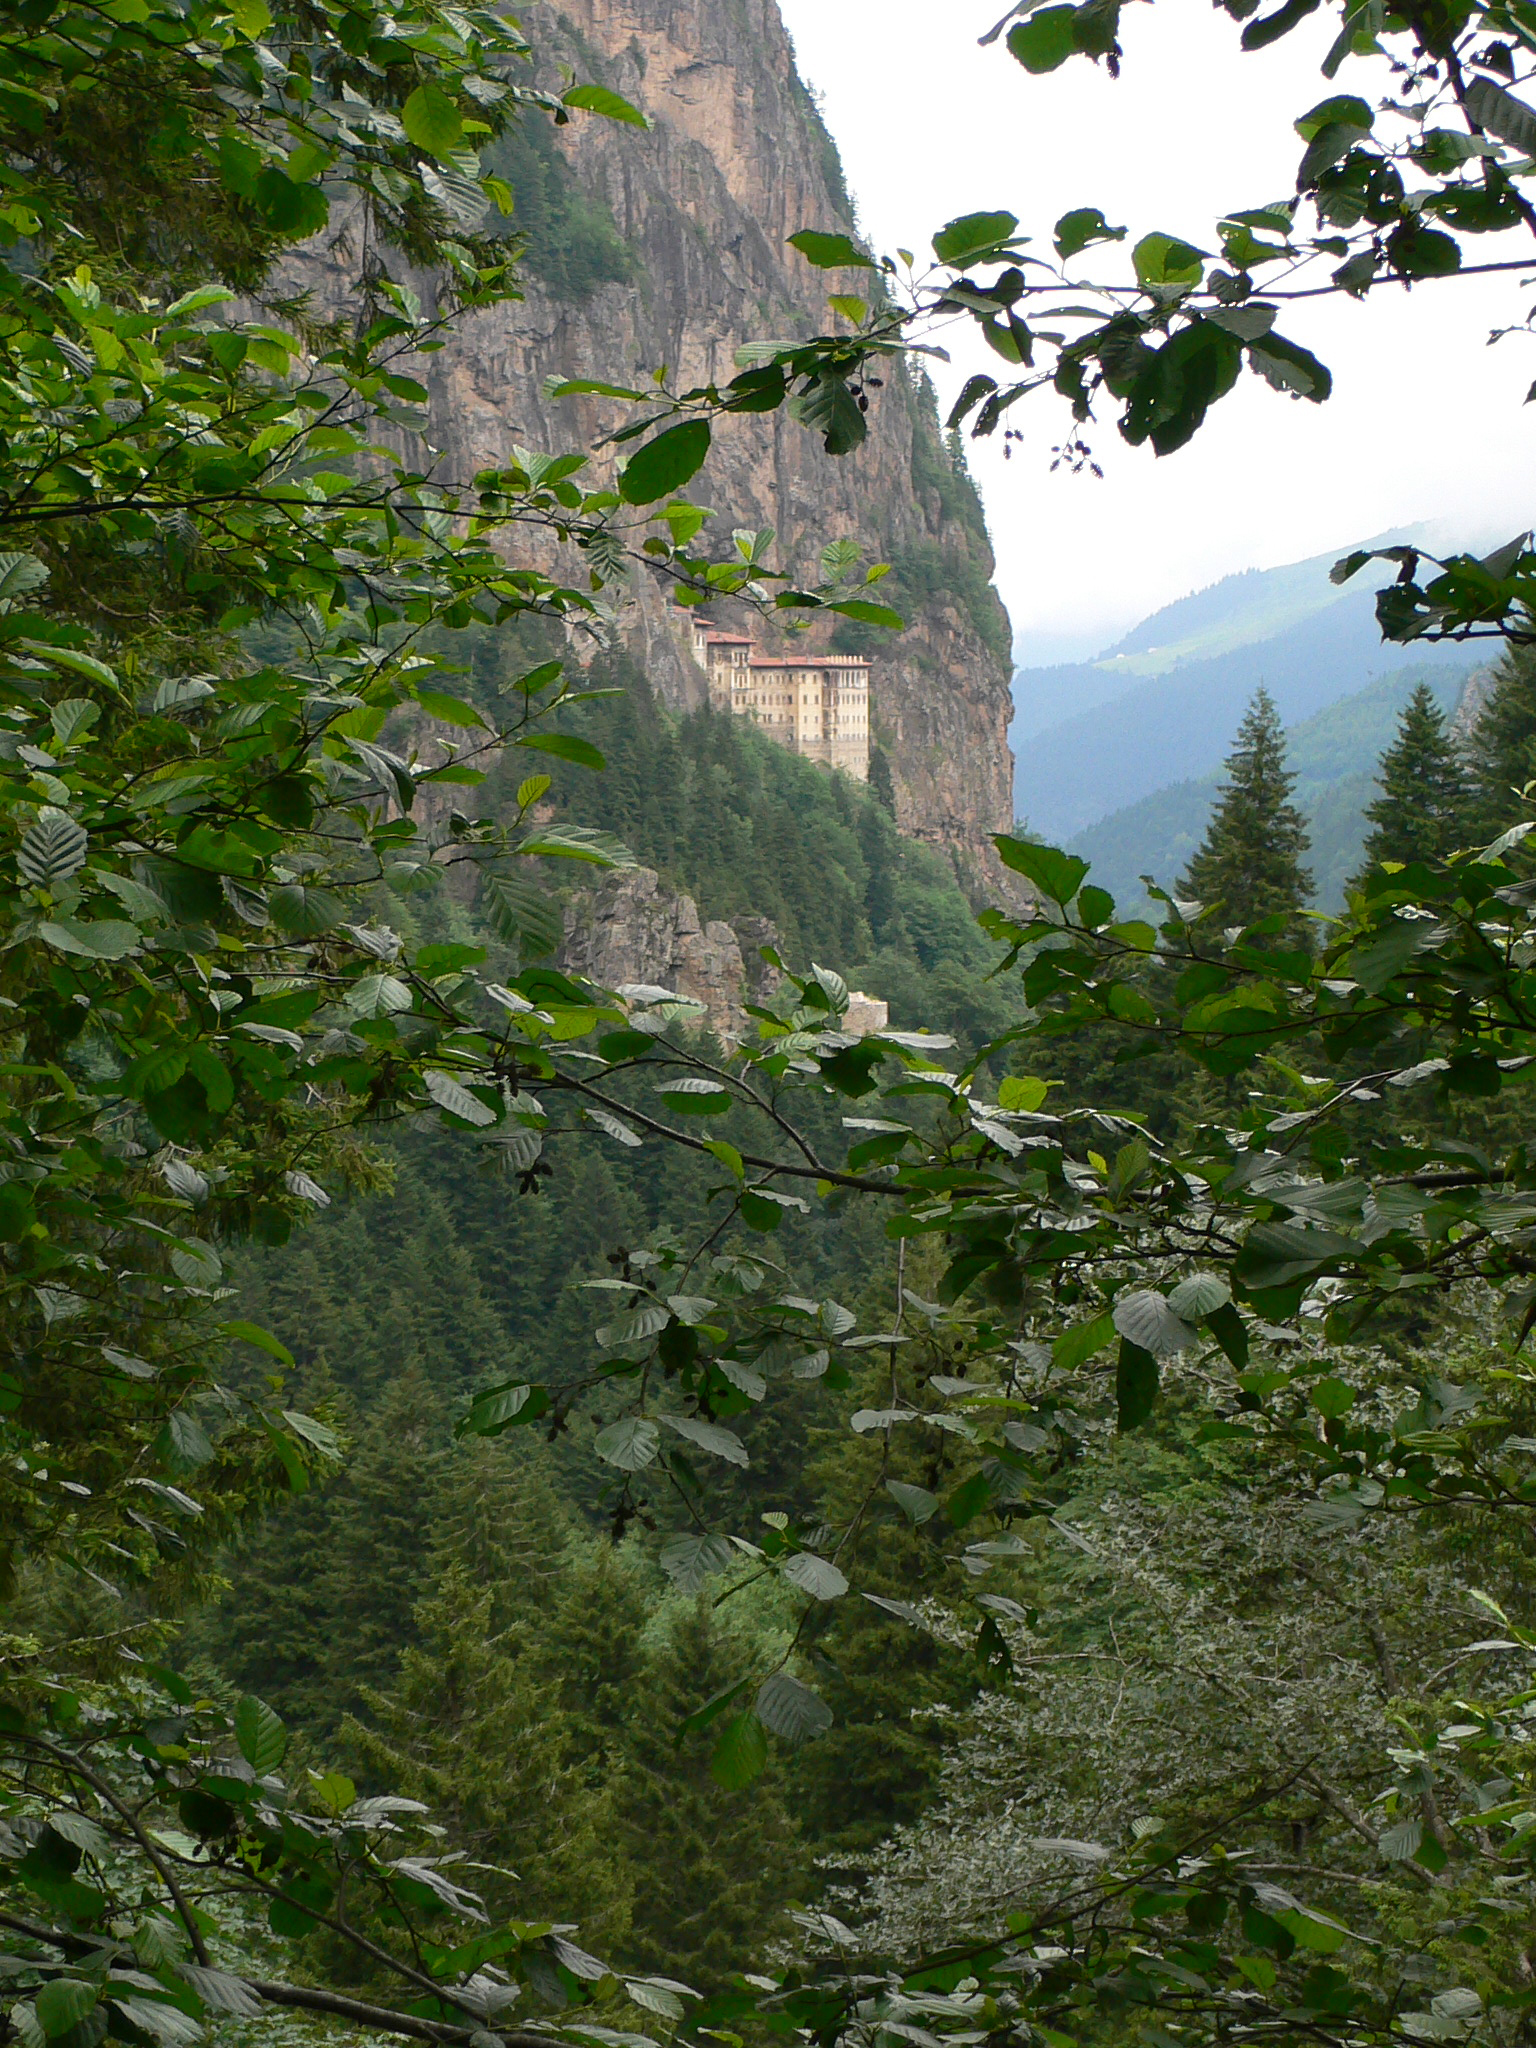 Sumela Christian monastery, clinging to cliff face in mountain valley,Mocka